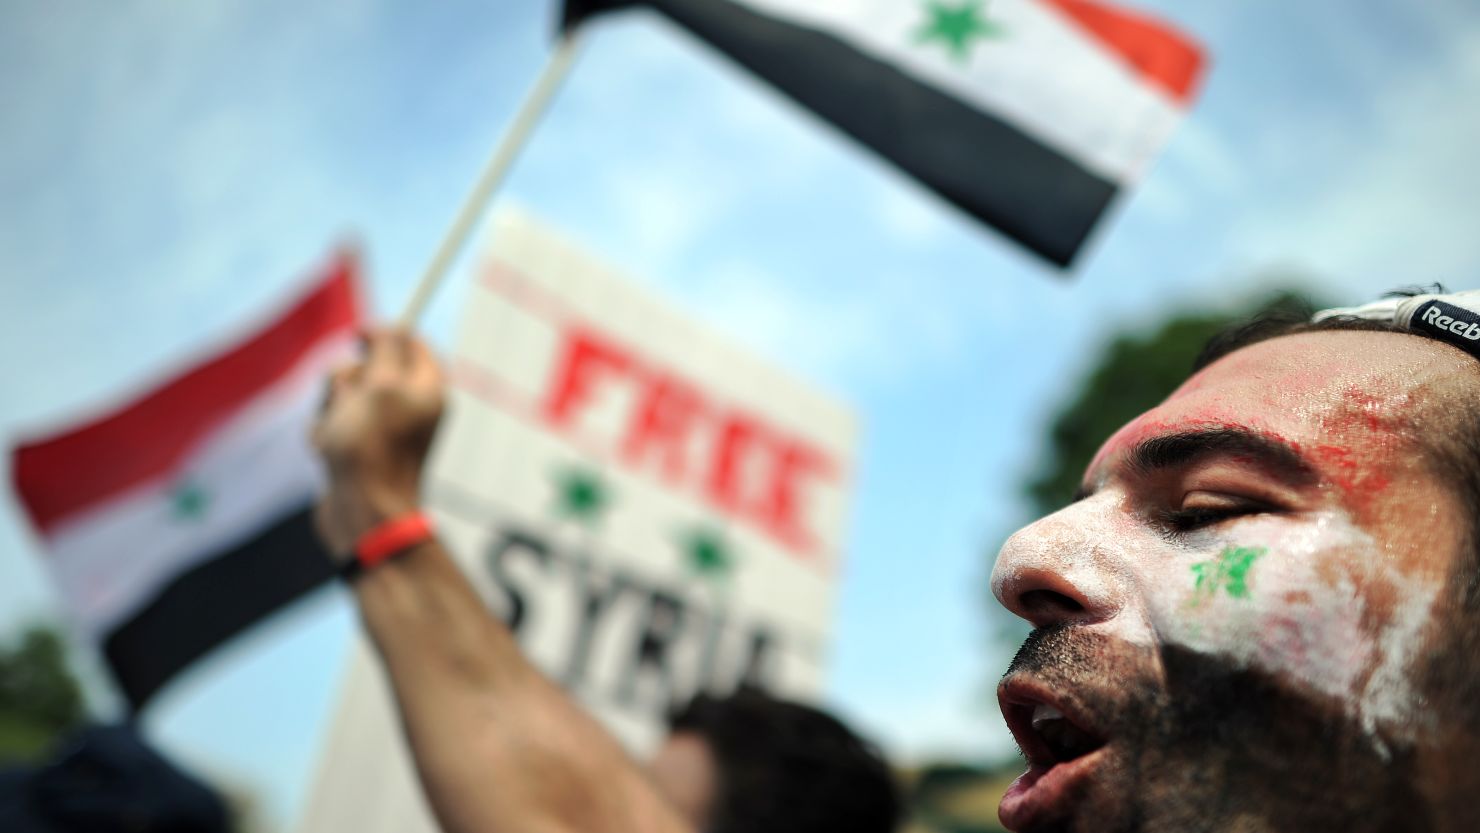 A man shouts slogans against the Syrian government in front of the White House in Washington, DC, on July 23, 2011.